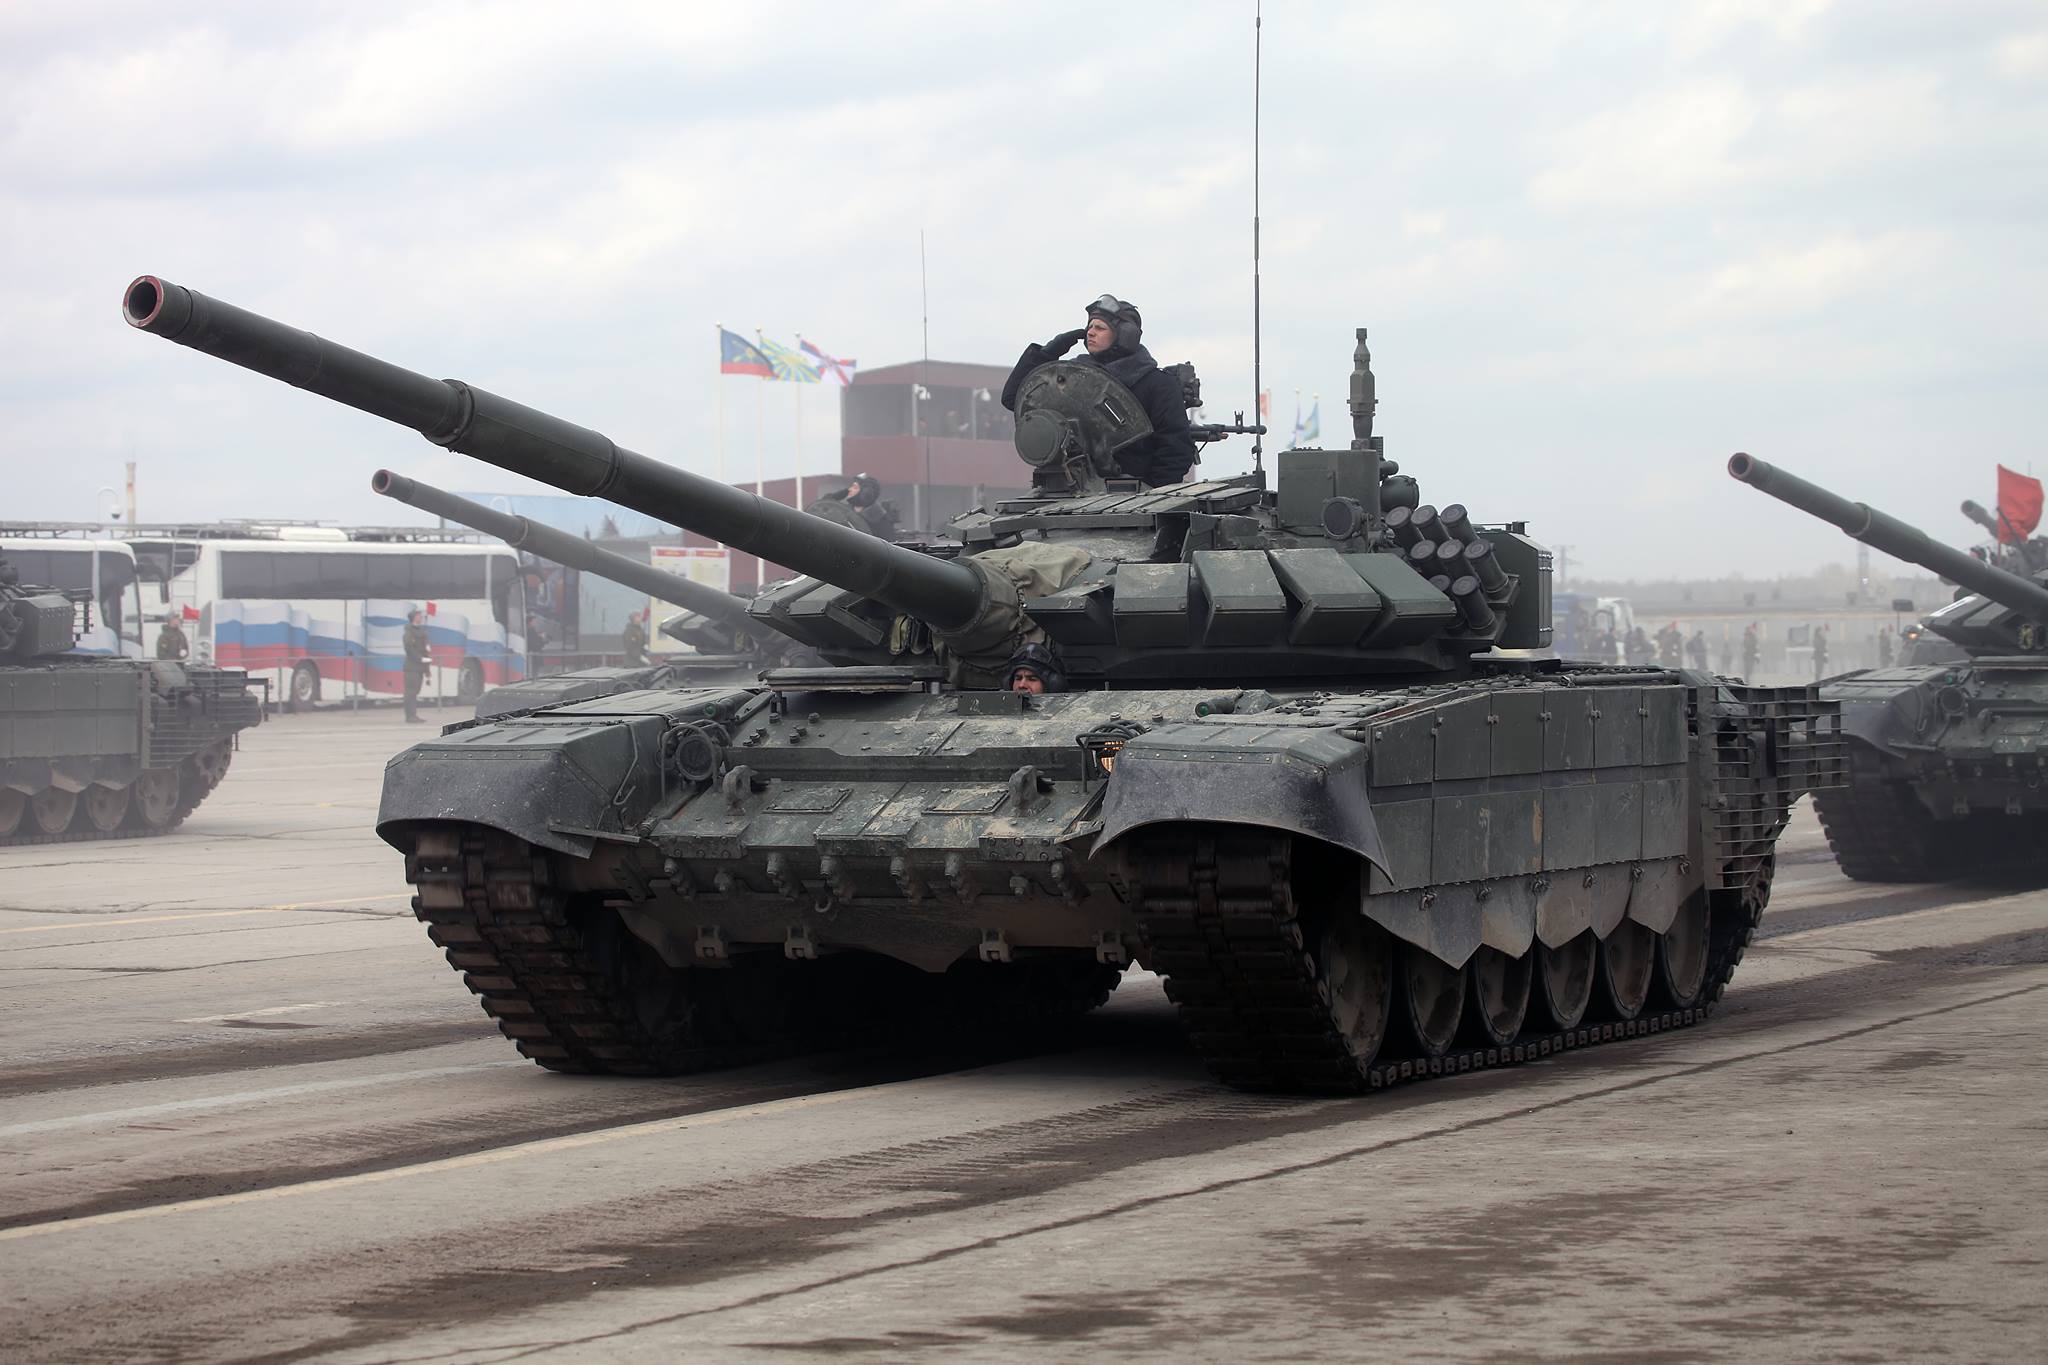 Modernised T 72b3 Main Battle Tanks To Debut In Victory Day Parade In Russia